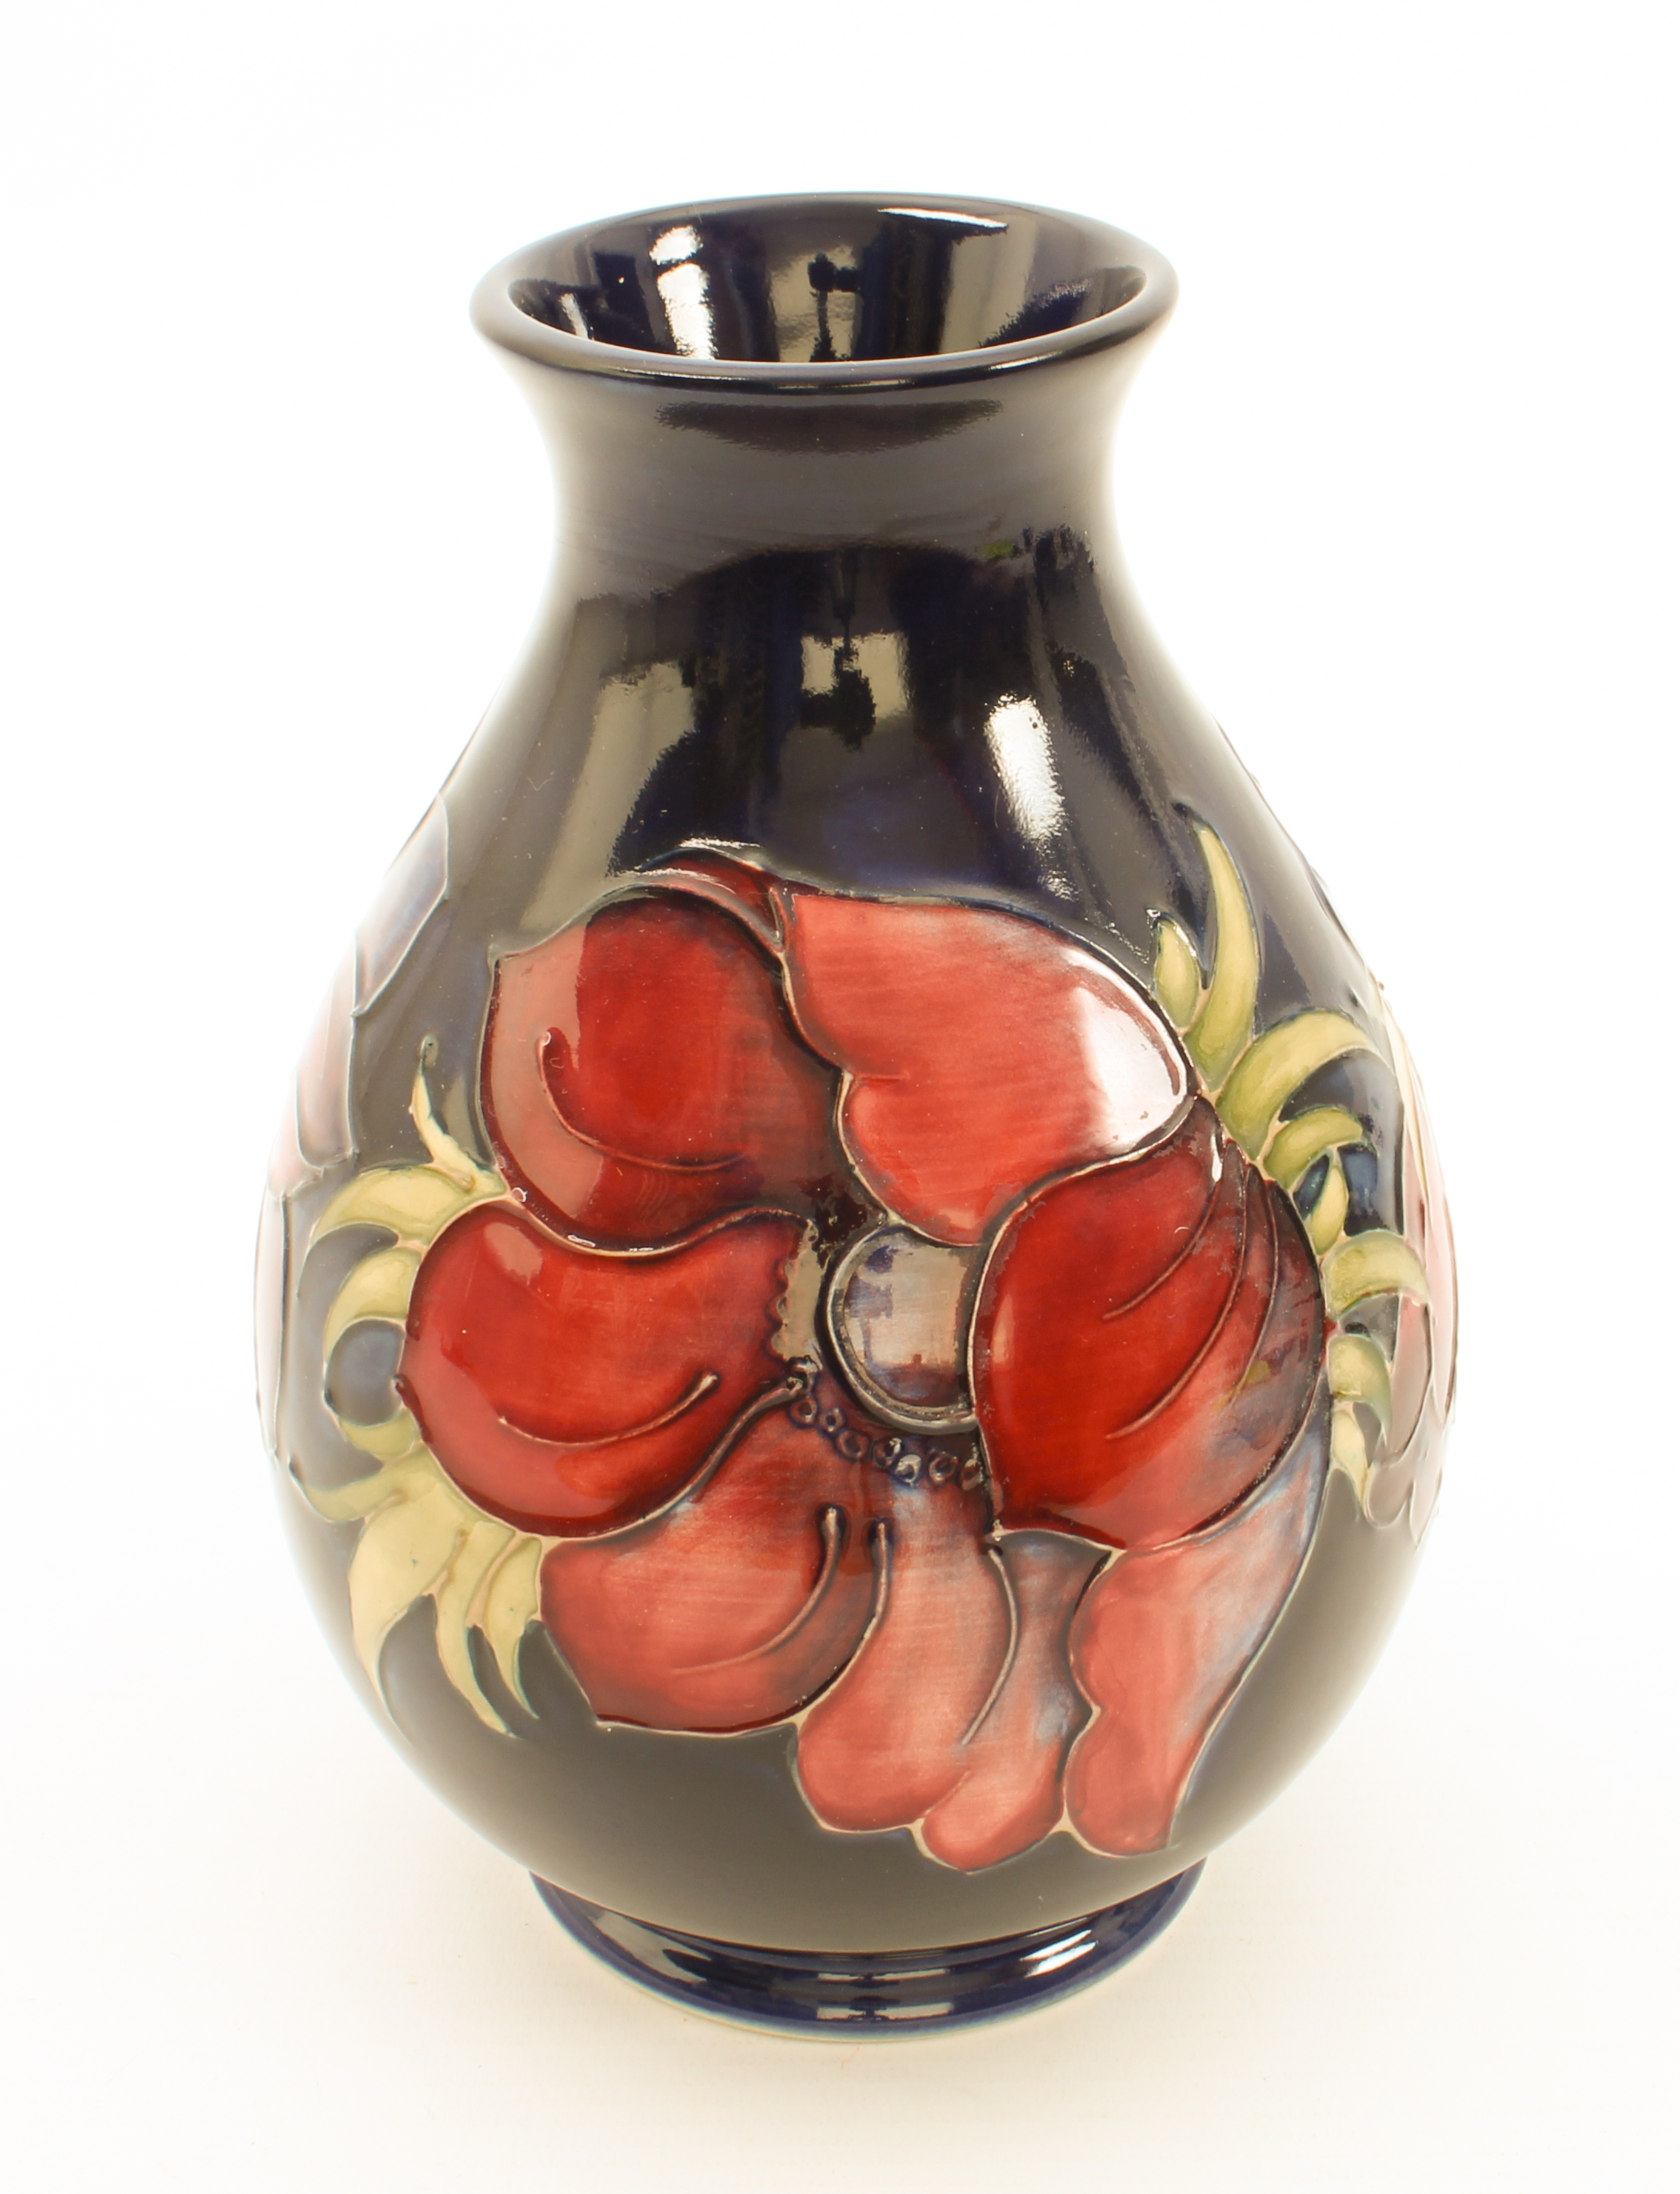 A Moorcroft baluster vase in the 'Anemone' pattern - painted WM initials and painter's mark and